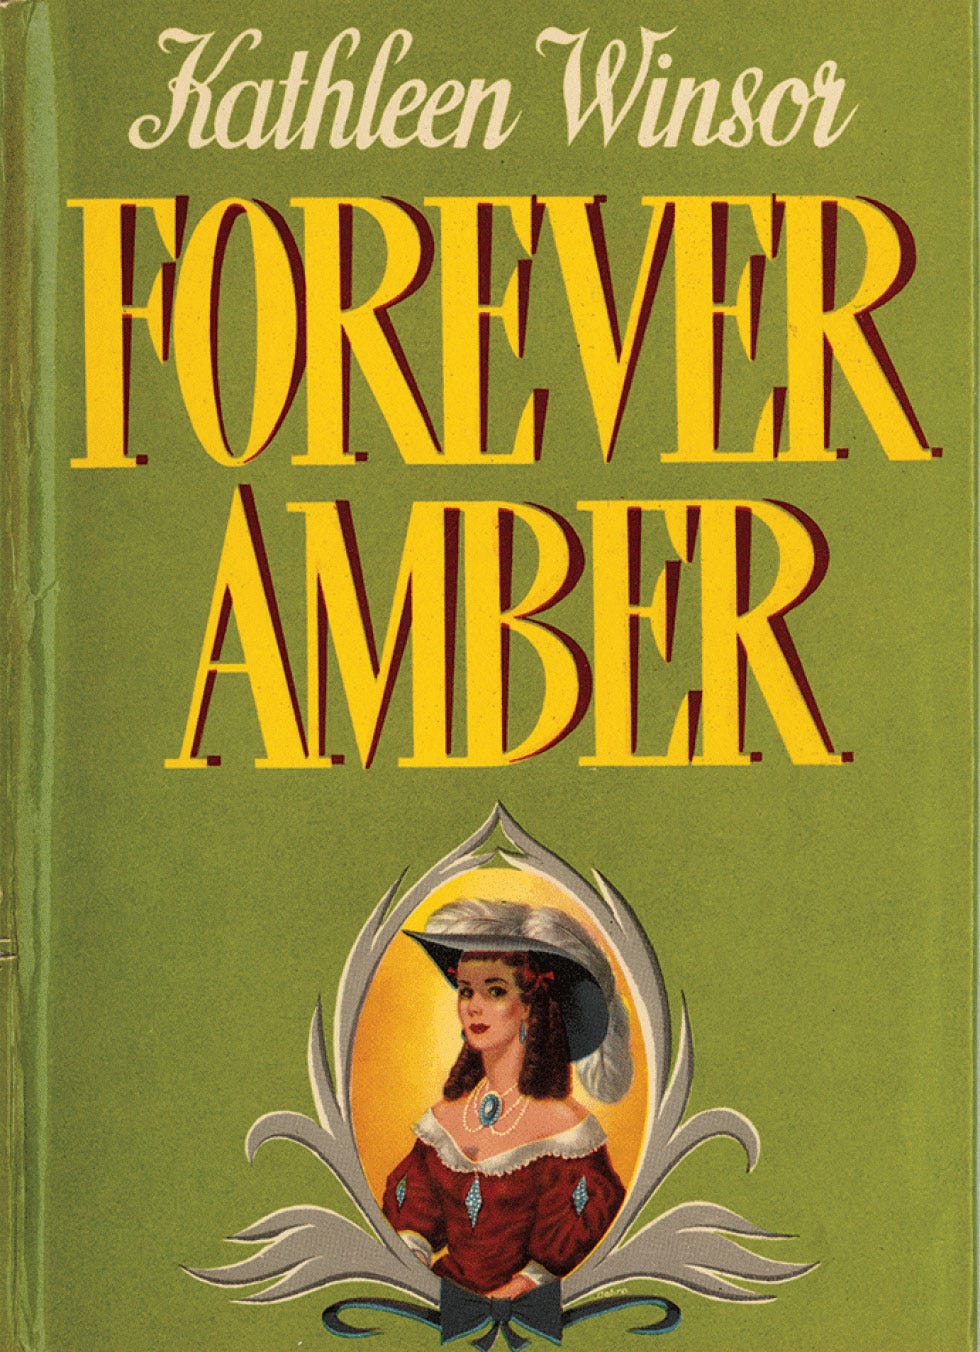 Front cover of 1944 novel Forever Amber by Kathleen Winsor. The cover art includes an image of the title character  in the 1947 film adaptation